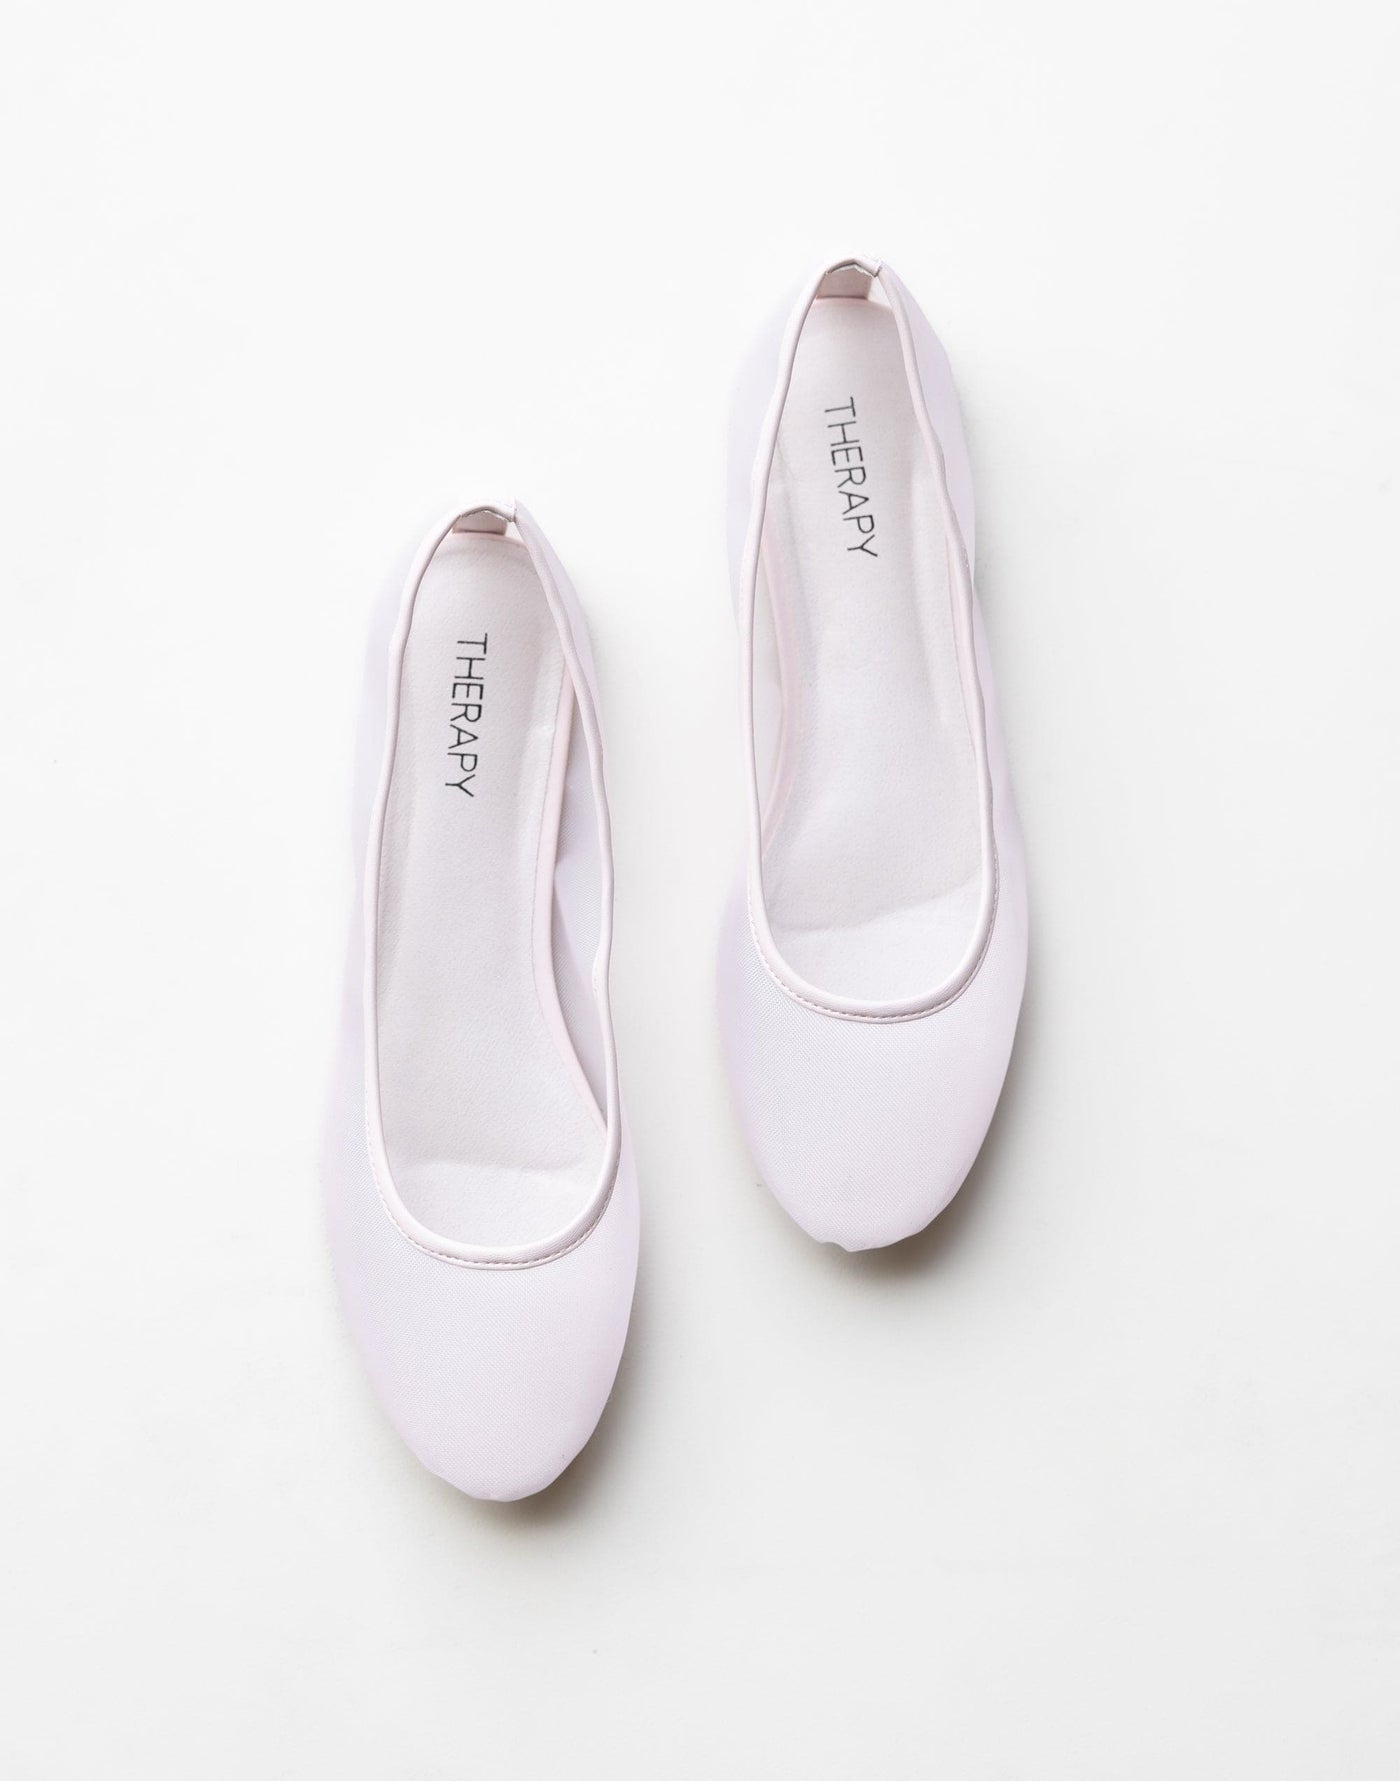 Arlo Mesh Ballet Flat (Blush) - By Therapy - Mesh Simple Minimal Ballet Flat - Women's Shoes - Charcoal Clothing